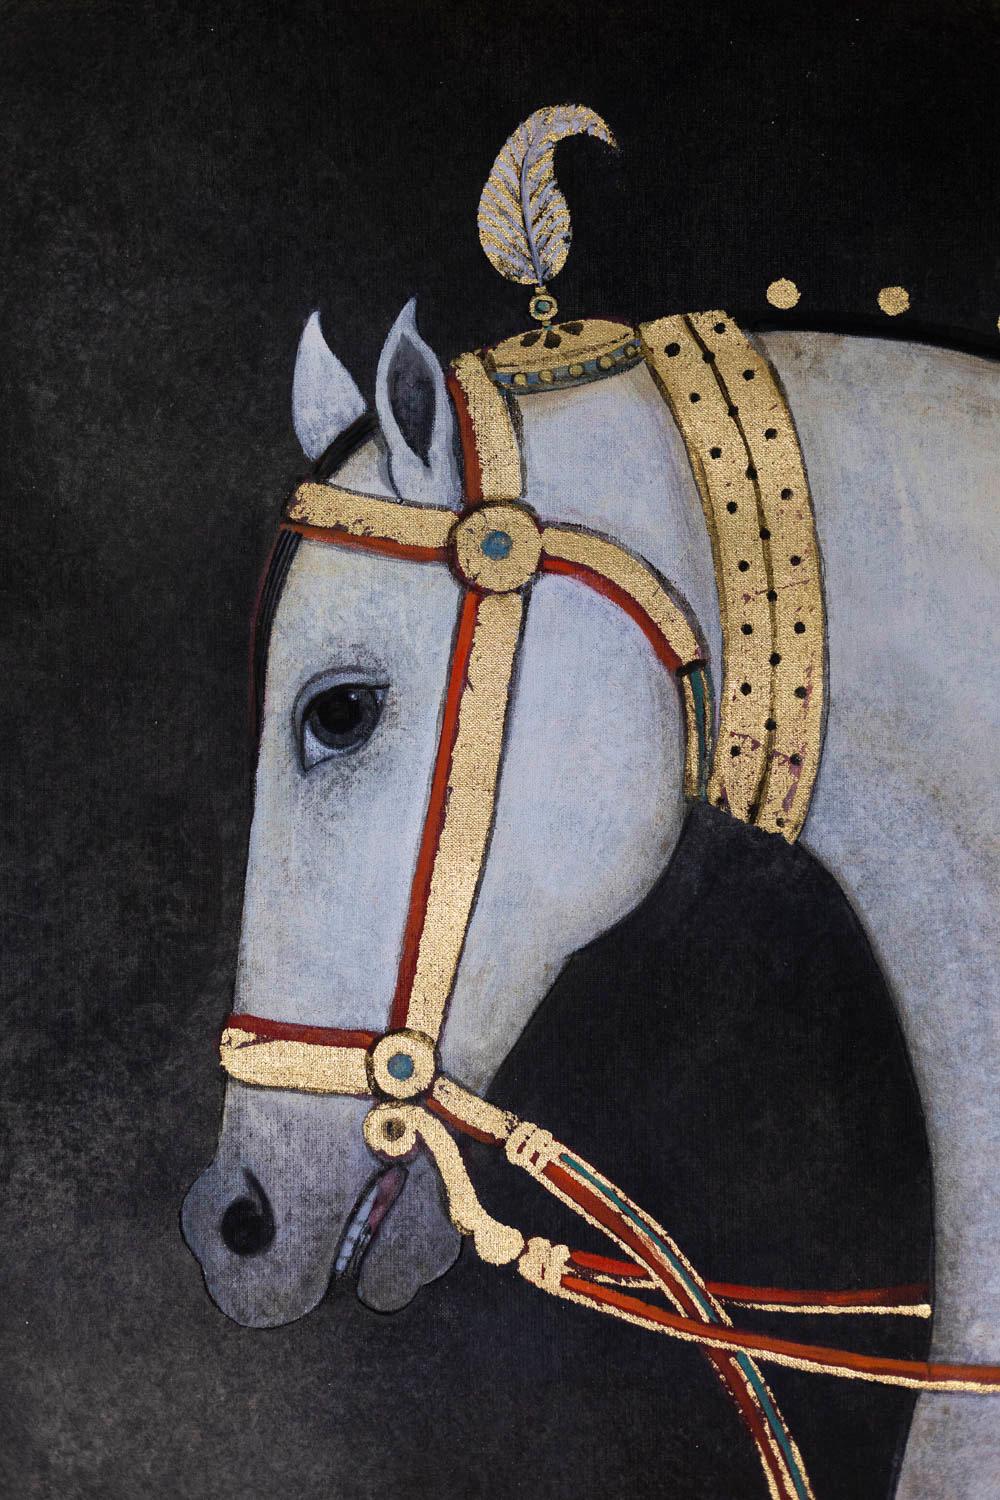 Painted canvas figuring a saddled white horse with a red and gilt saddle adorned with dark scrolls. Gilt and red bit and reins. Background in black tones.

Linen raw canvas hand painted with natural pigments and gilt motifs realized with copper